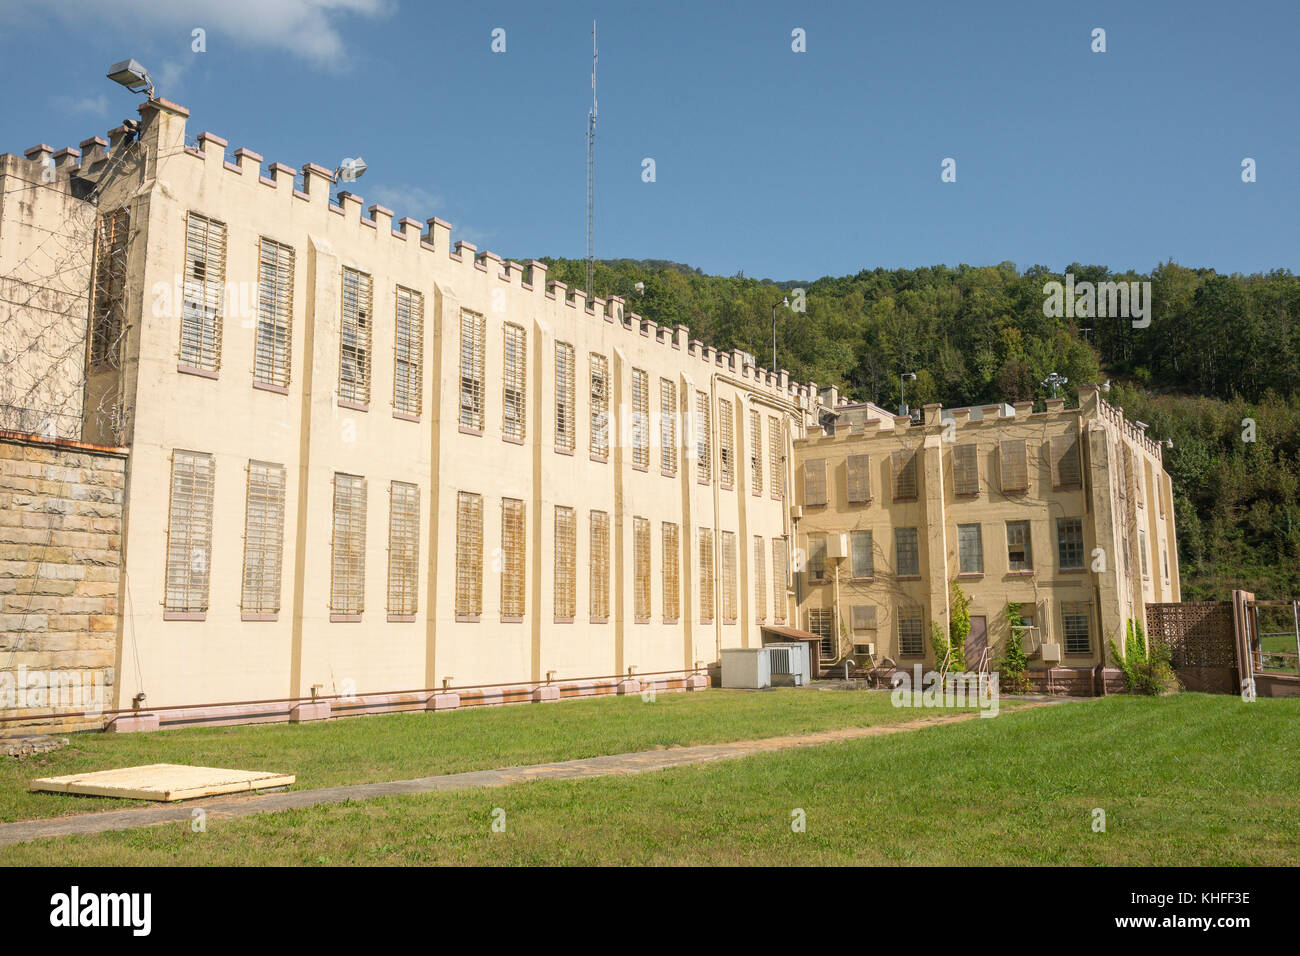 Exterior of Brushy Mountain State Correctional Penitentiary in Petros TN USA. Stock Photo